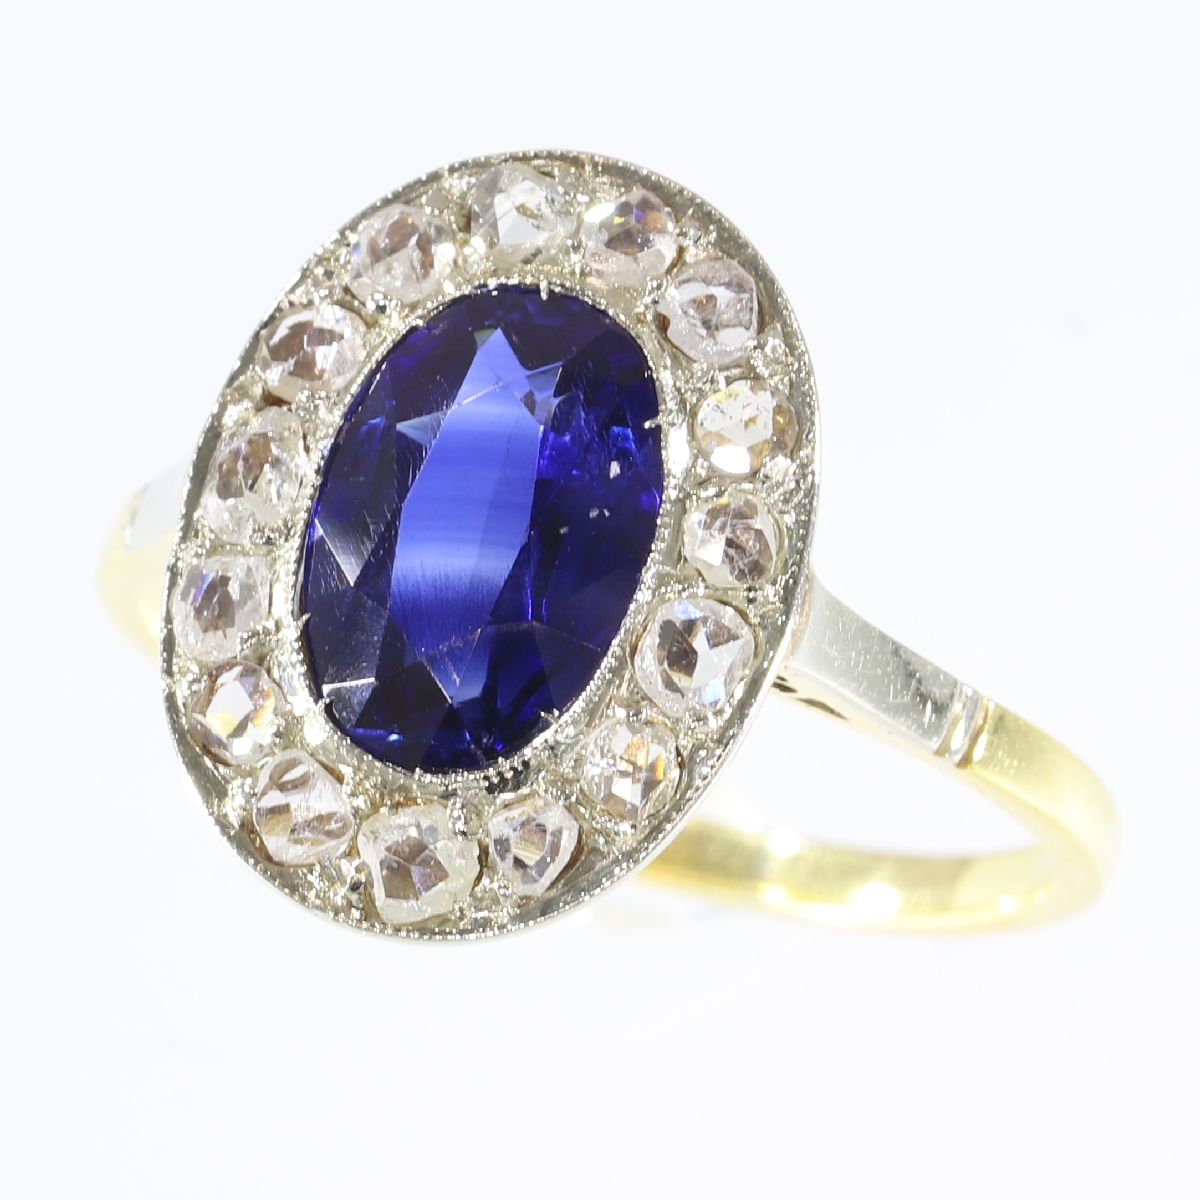 Estate diamond and sapphire anniversary or engagement ring